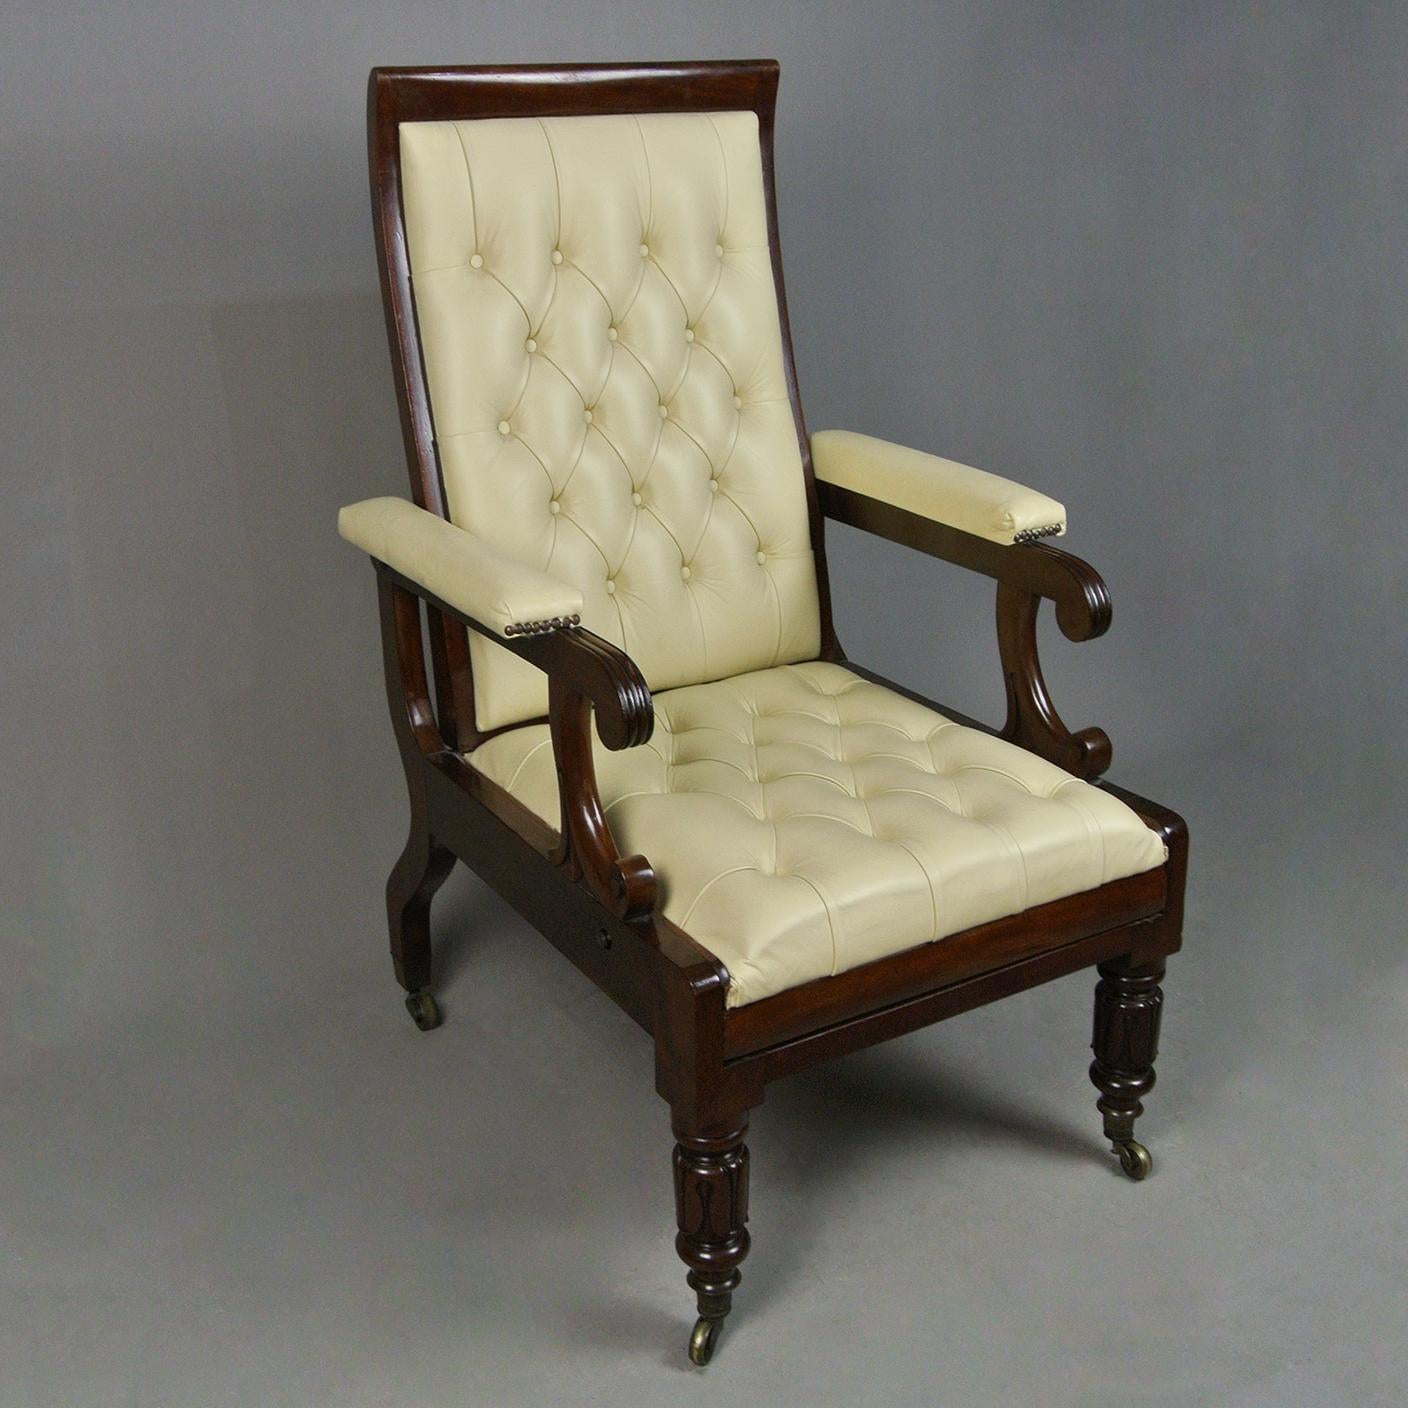 Regency Solid Mahogany ‘Daws Patent’ Reclining Chair c. 1830 For Sale 2